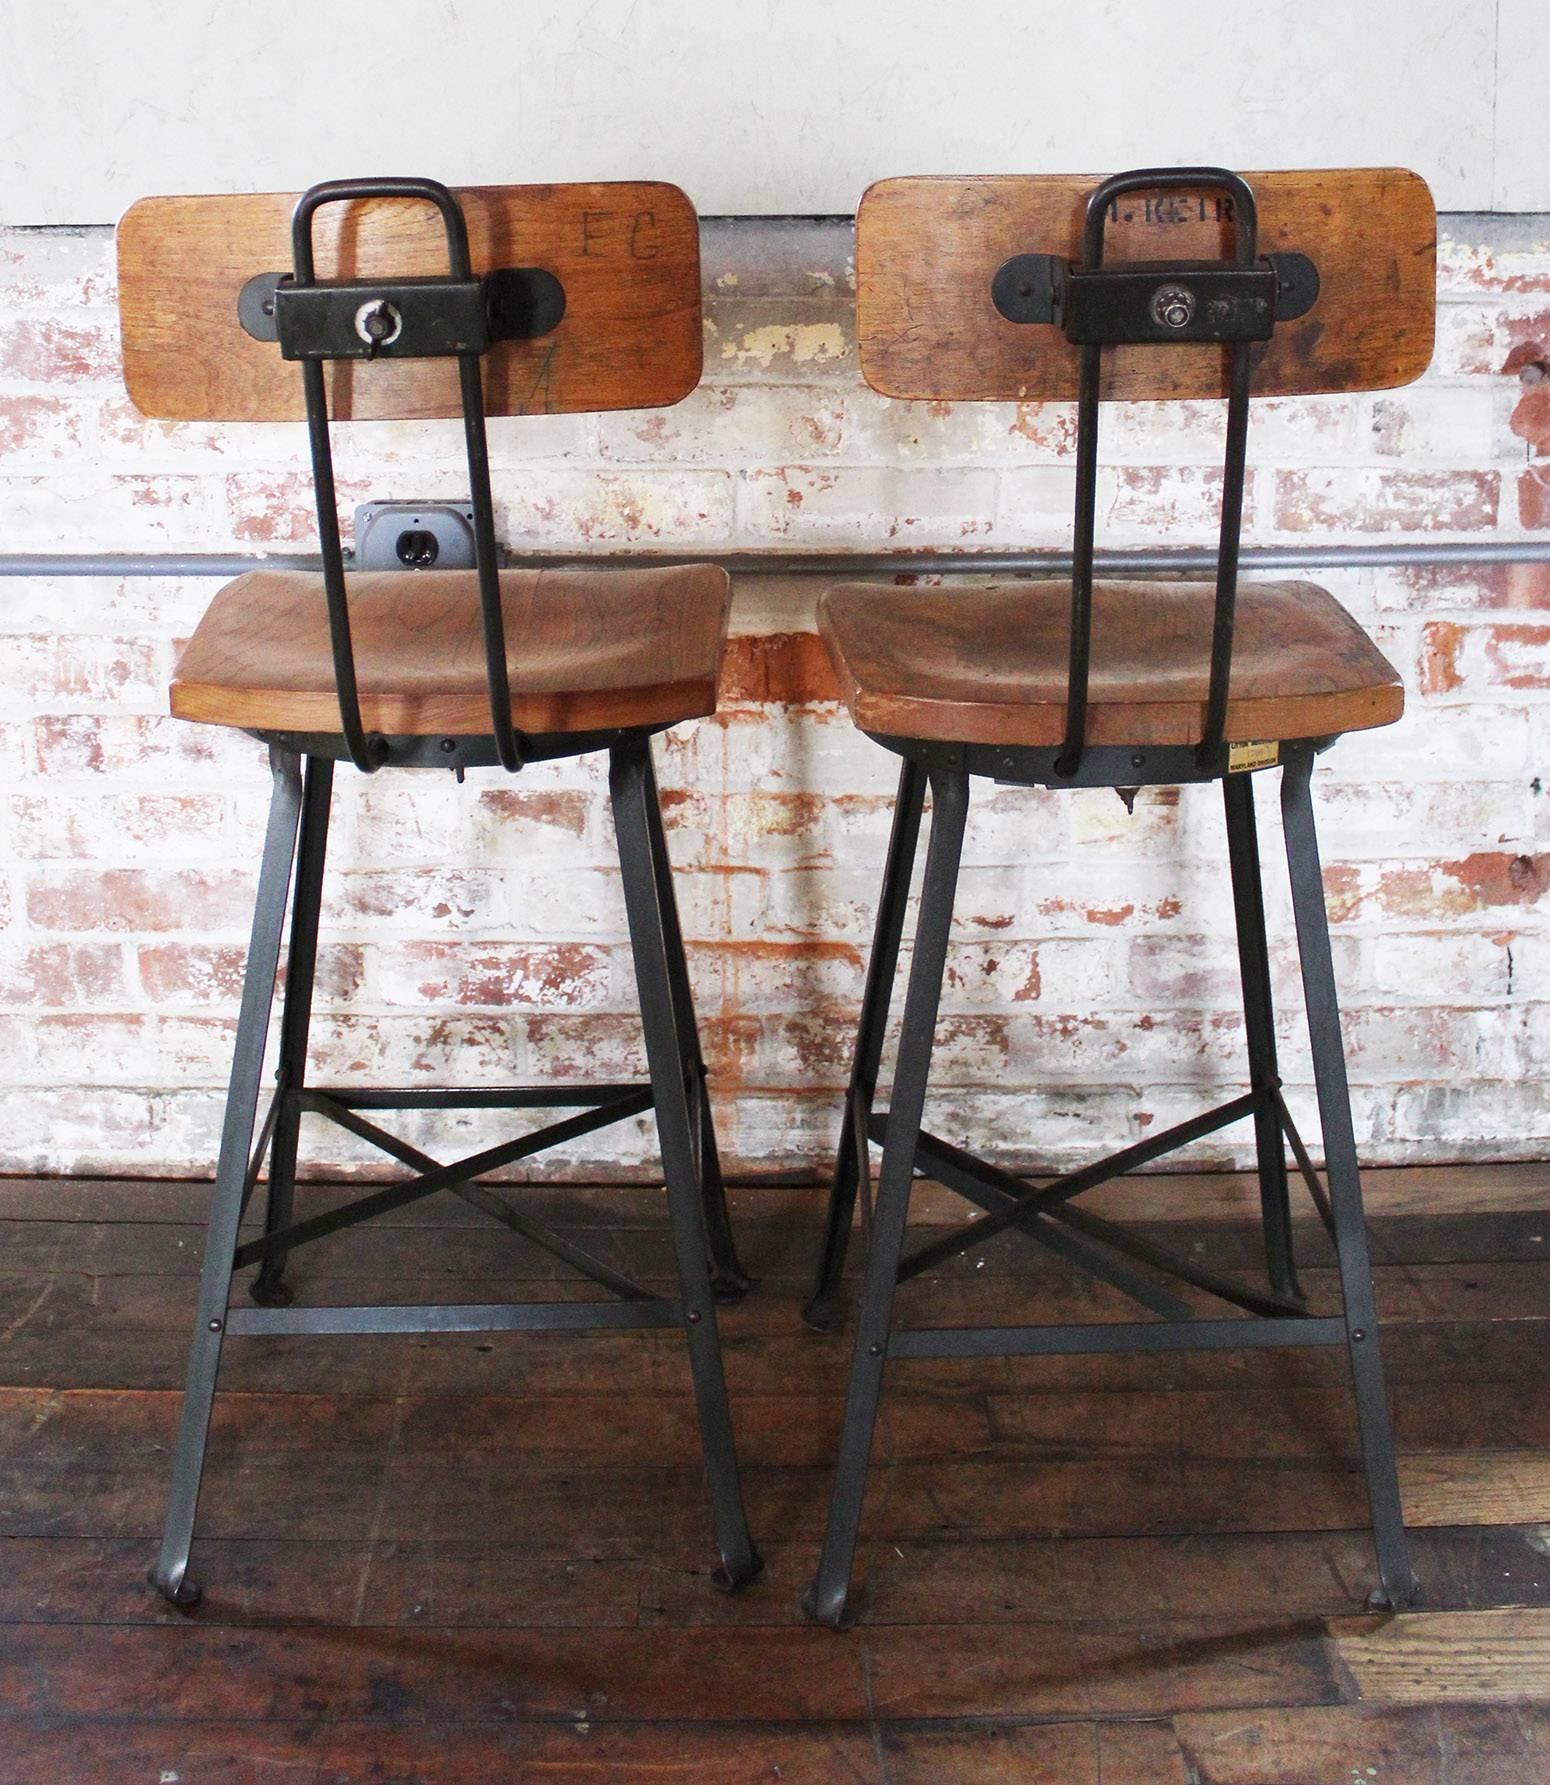 Pair of vintage Industrial wood and metal bar stools. Adjustable seat back height and depth. Overall dimensions are 36 1/2